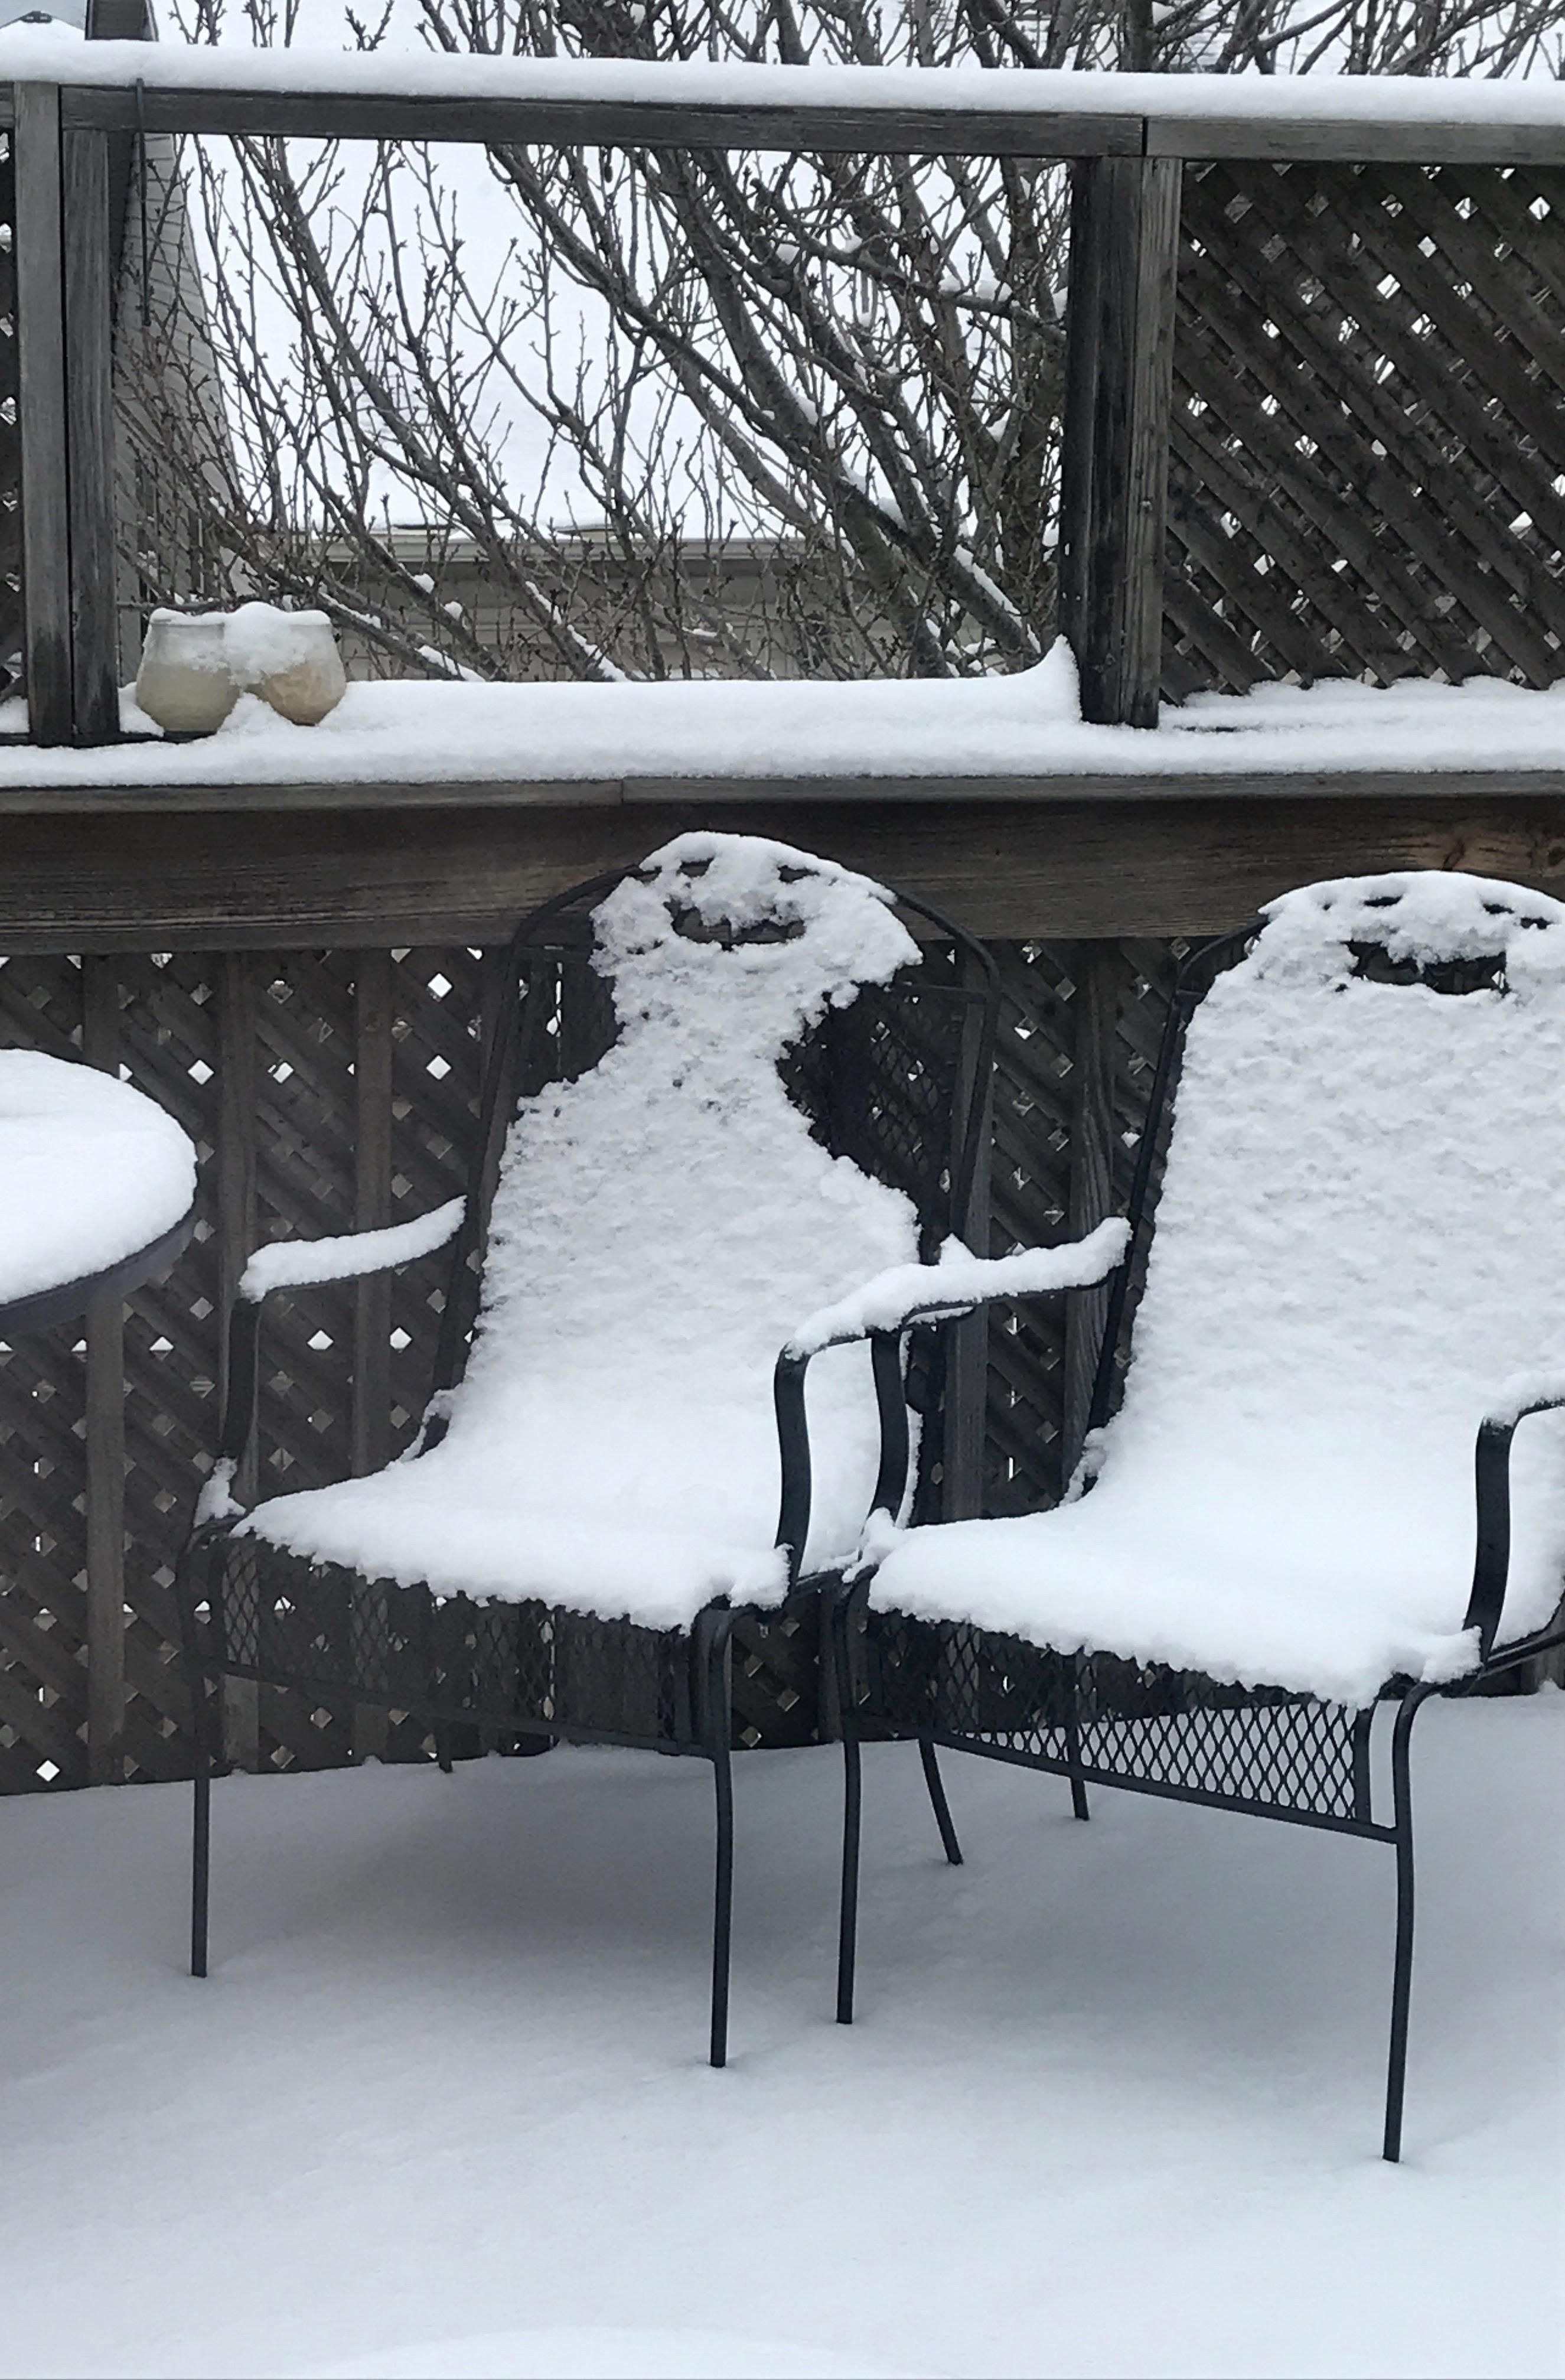 Woke up to these two sharing a laugh on my patio.